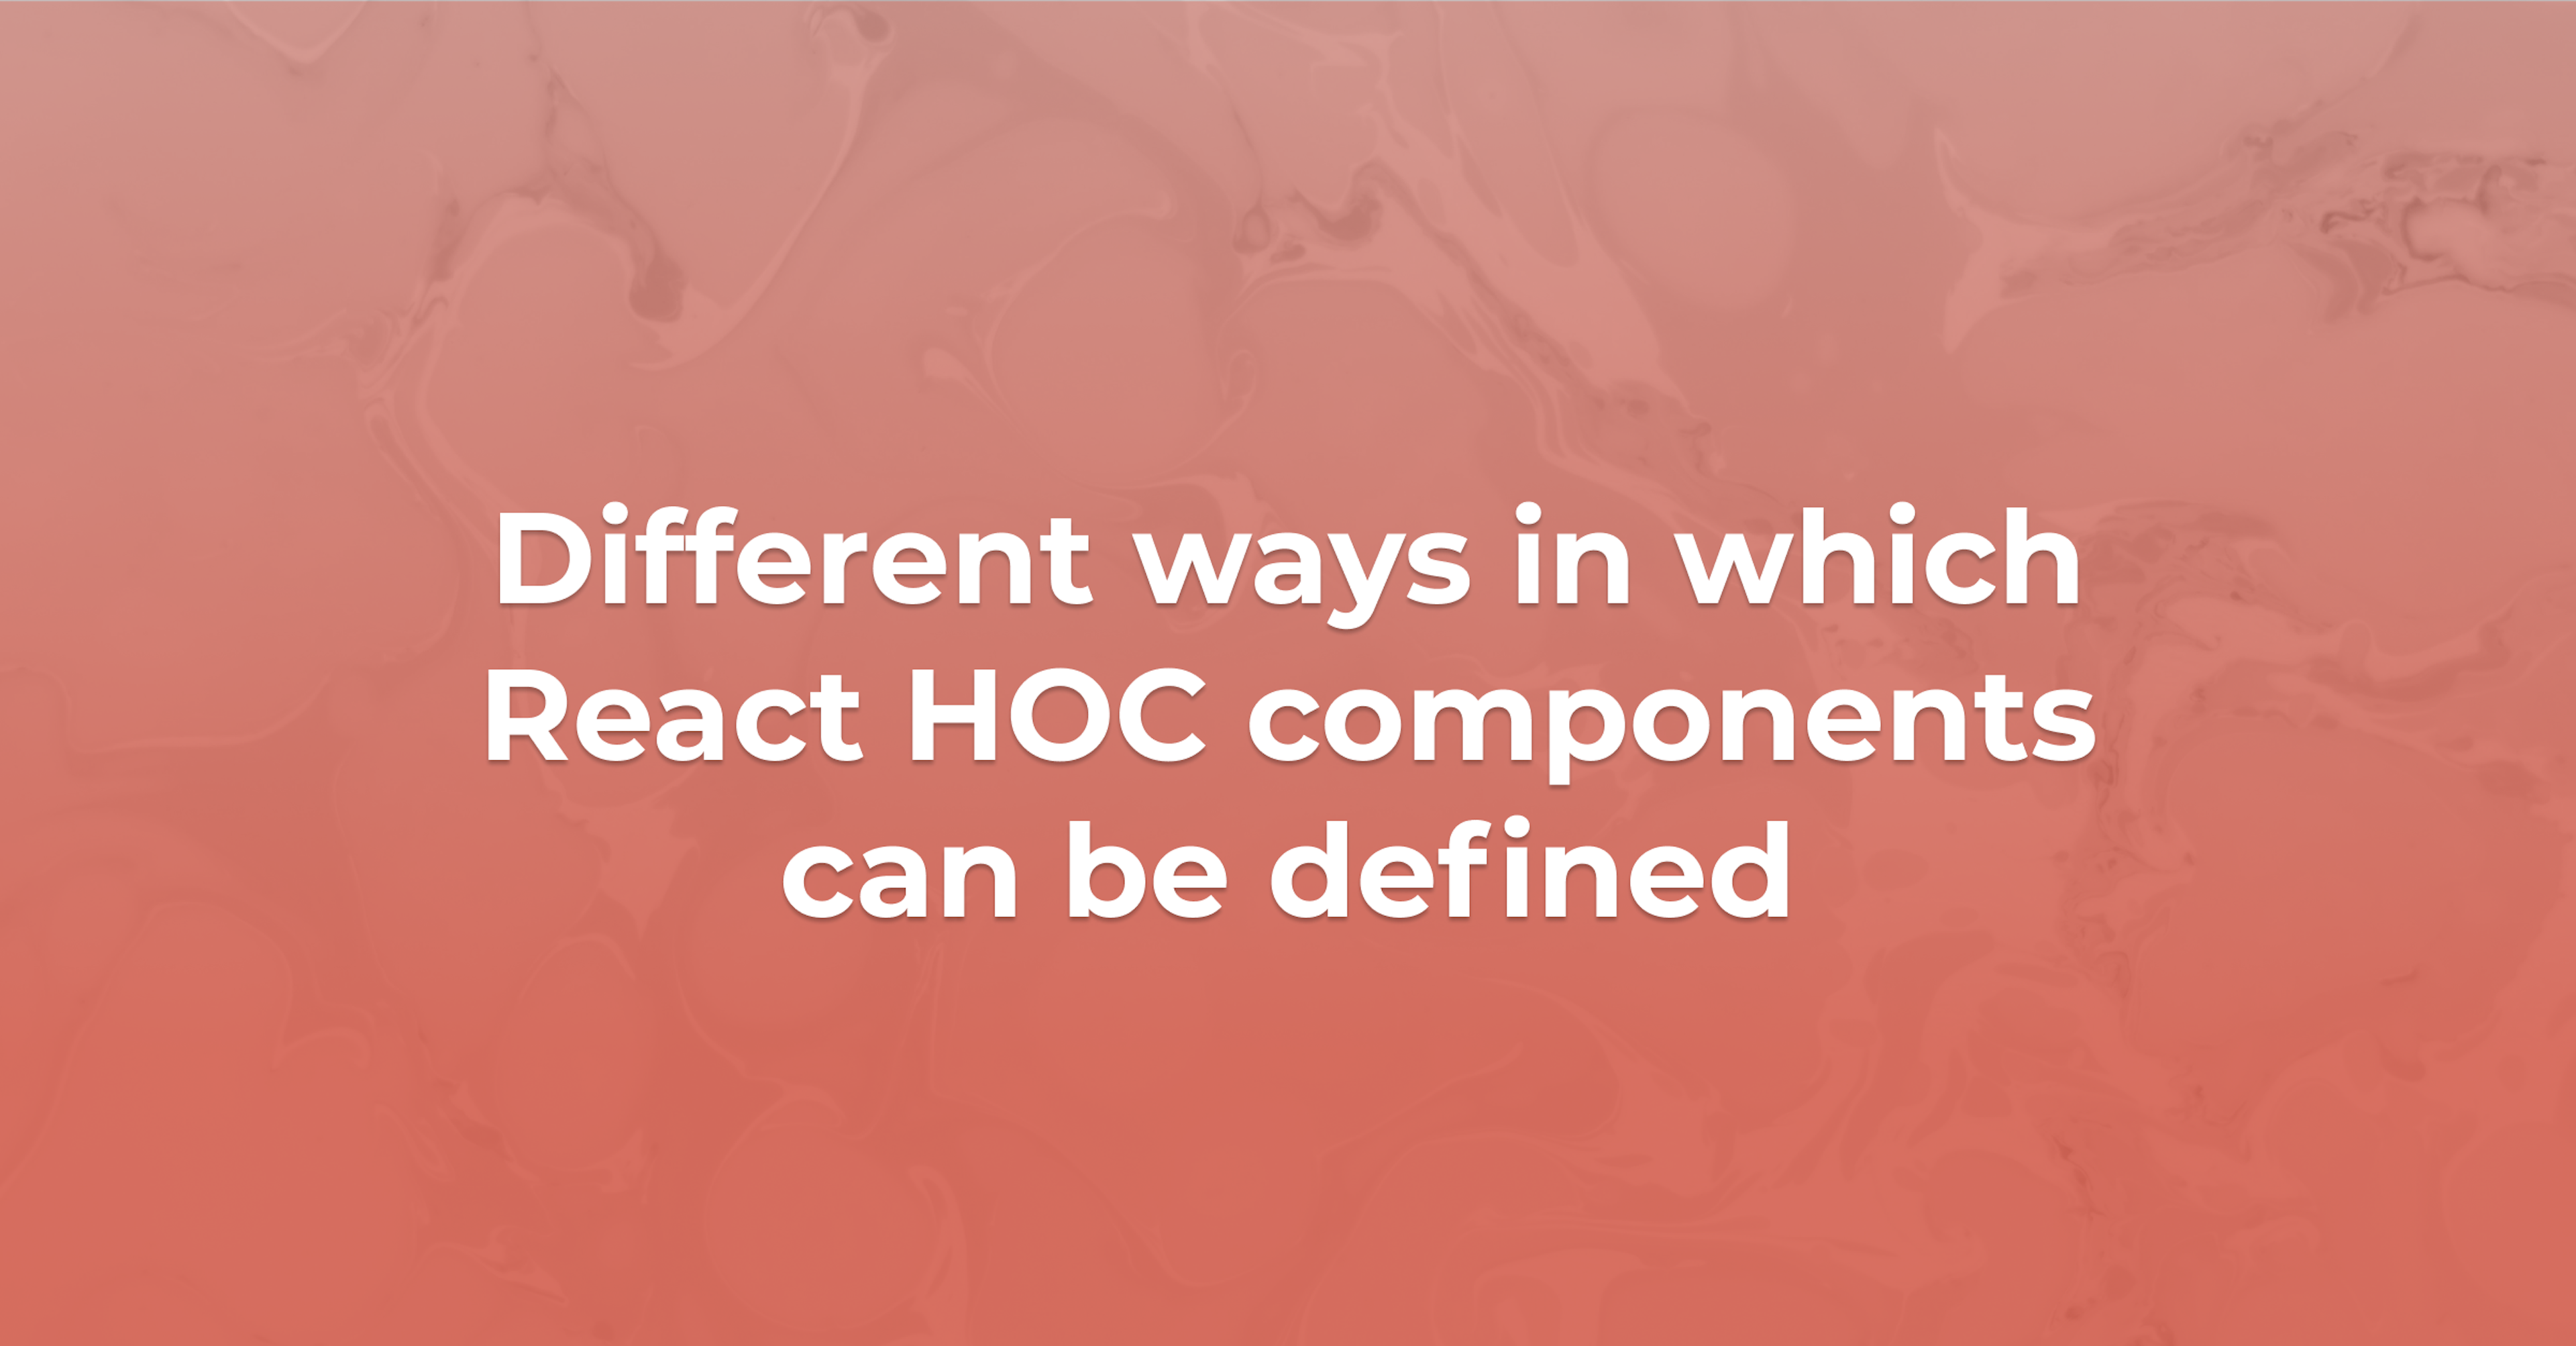 What are the different ways in which React HOC components can be defined?